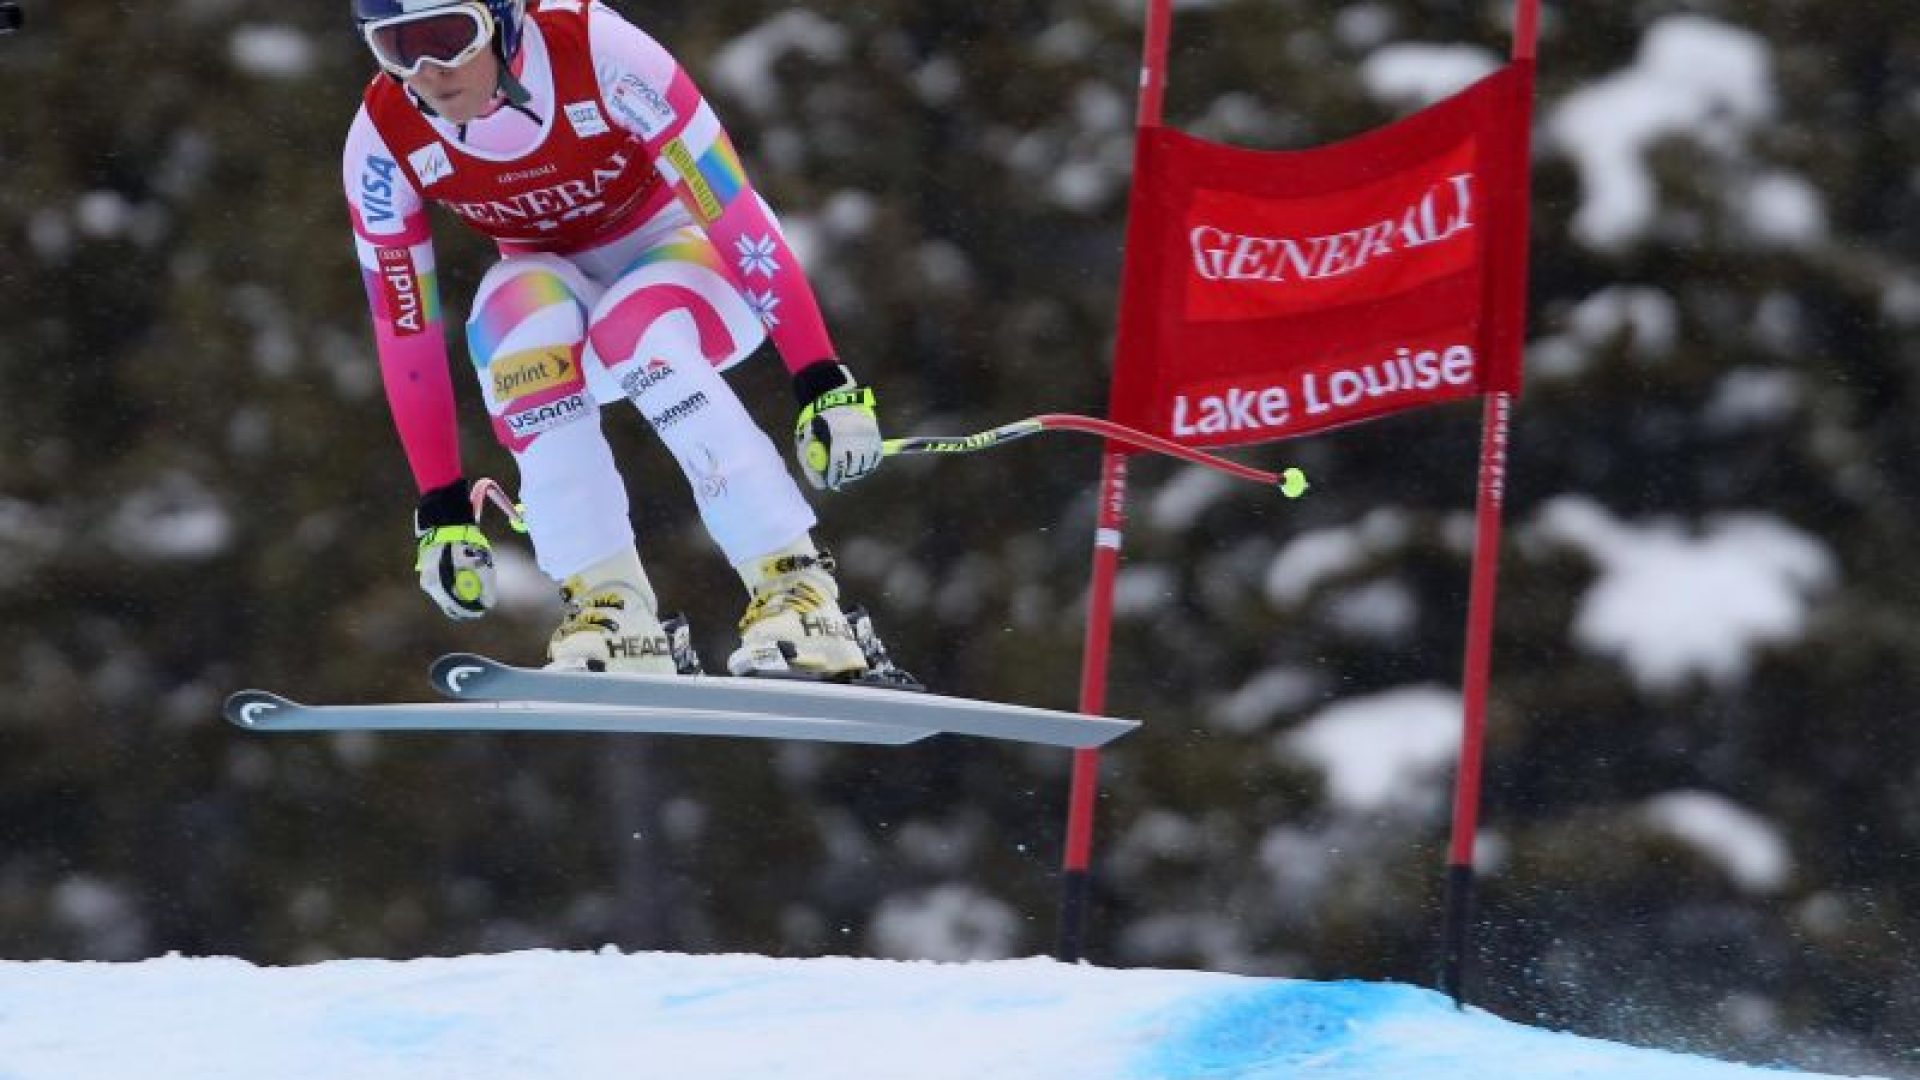 lindsey-wins-dh-in-lake-louise-7